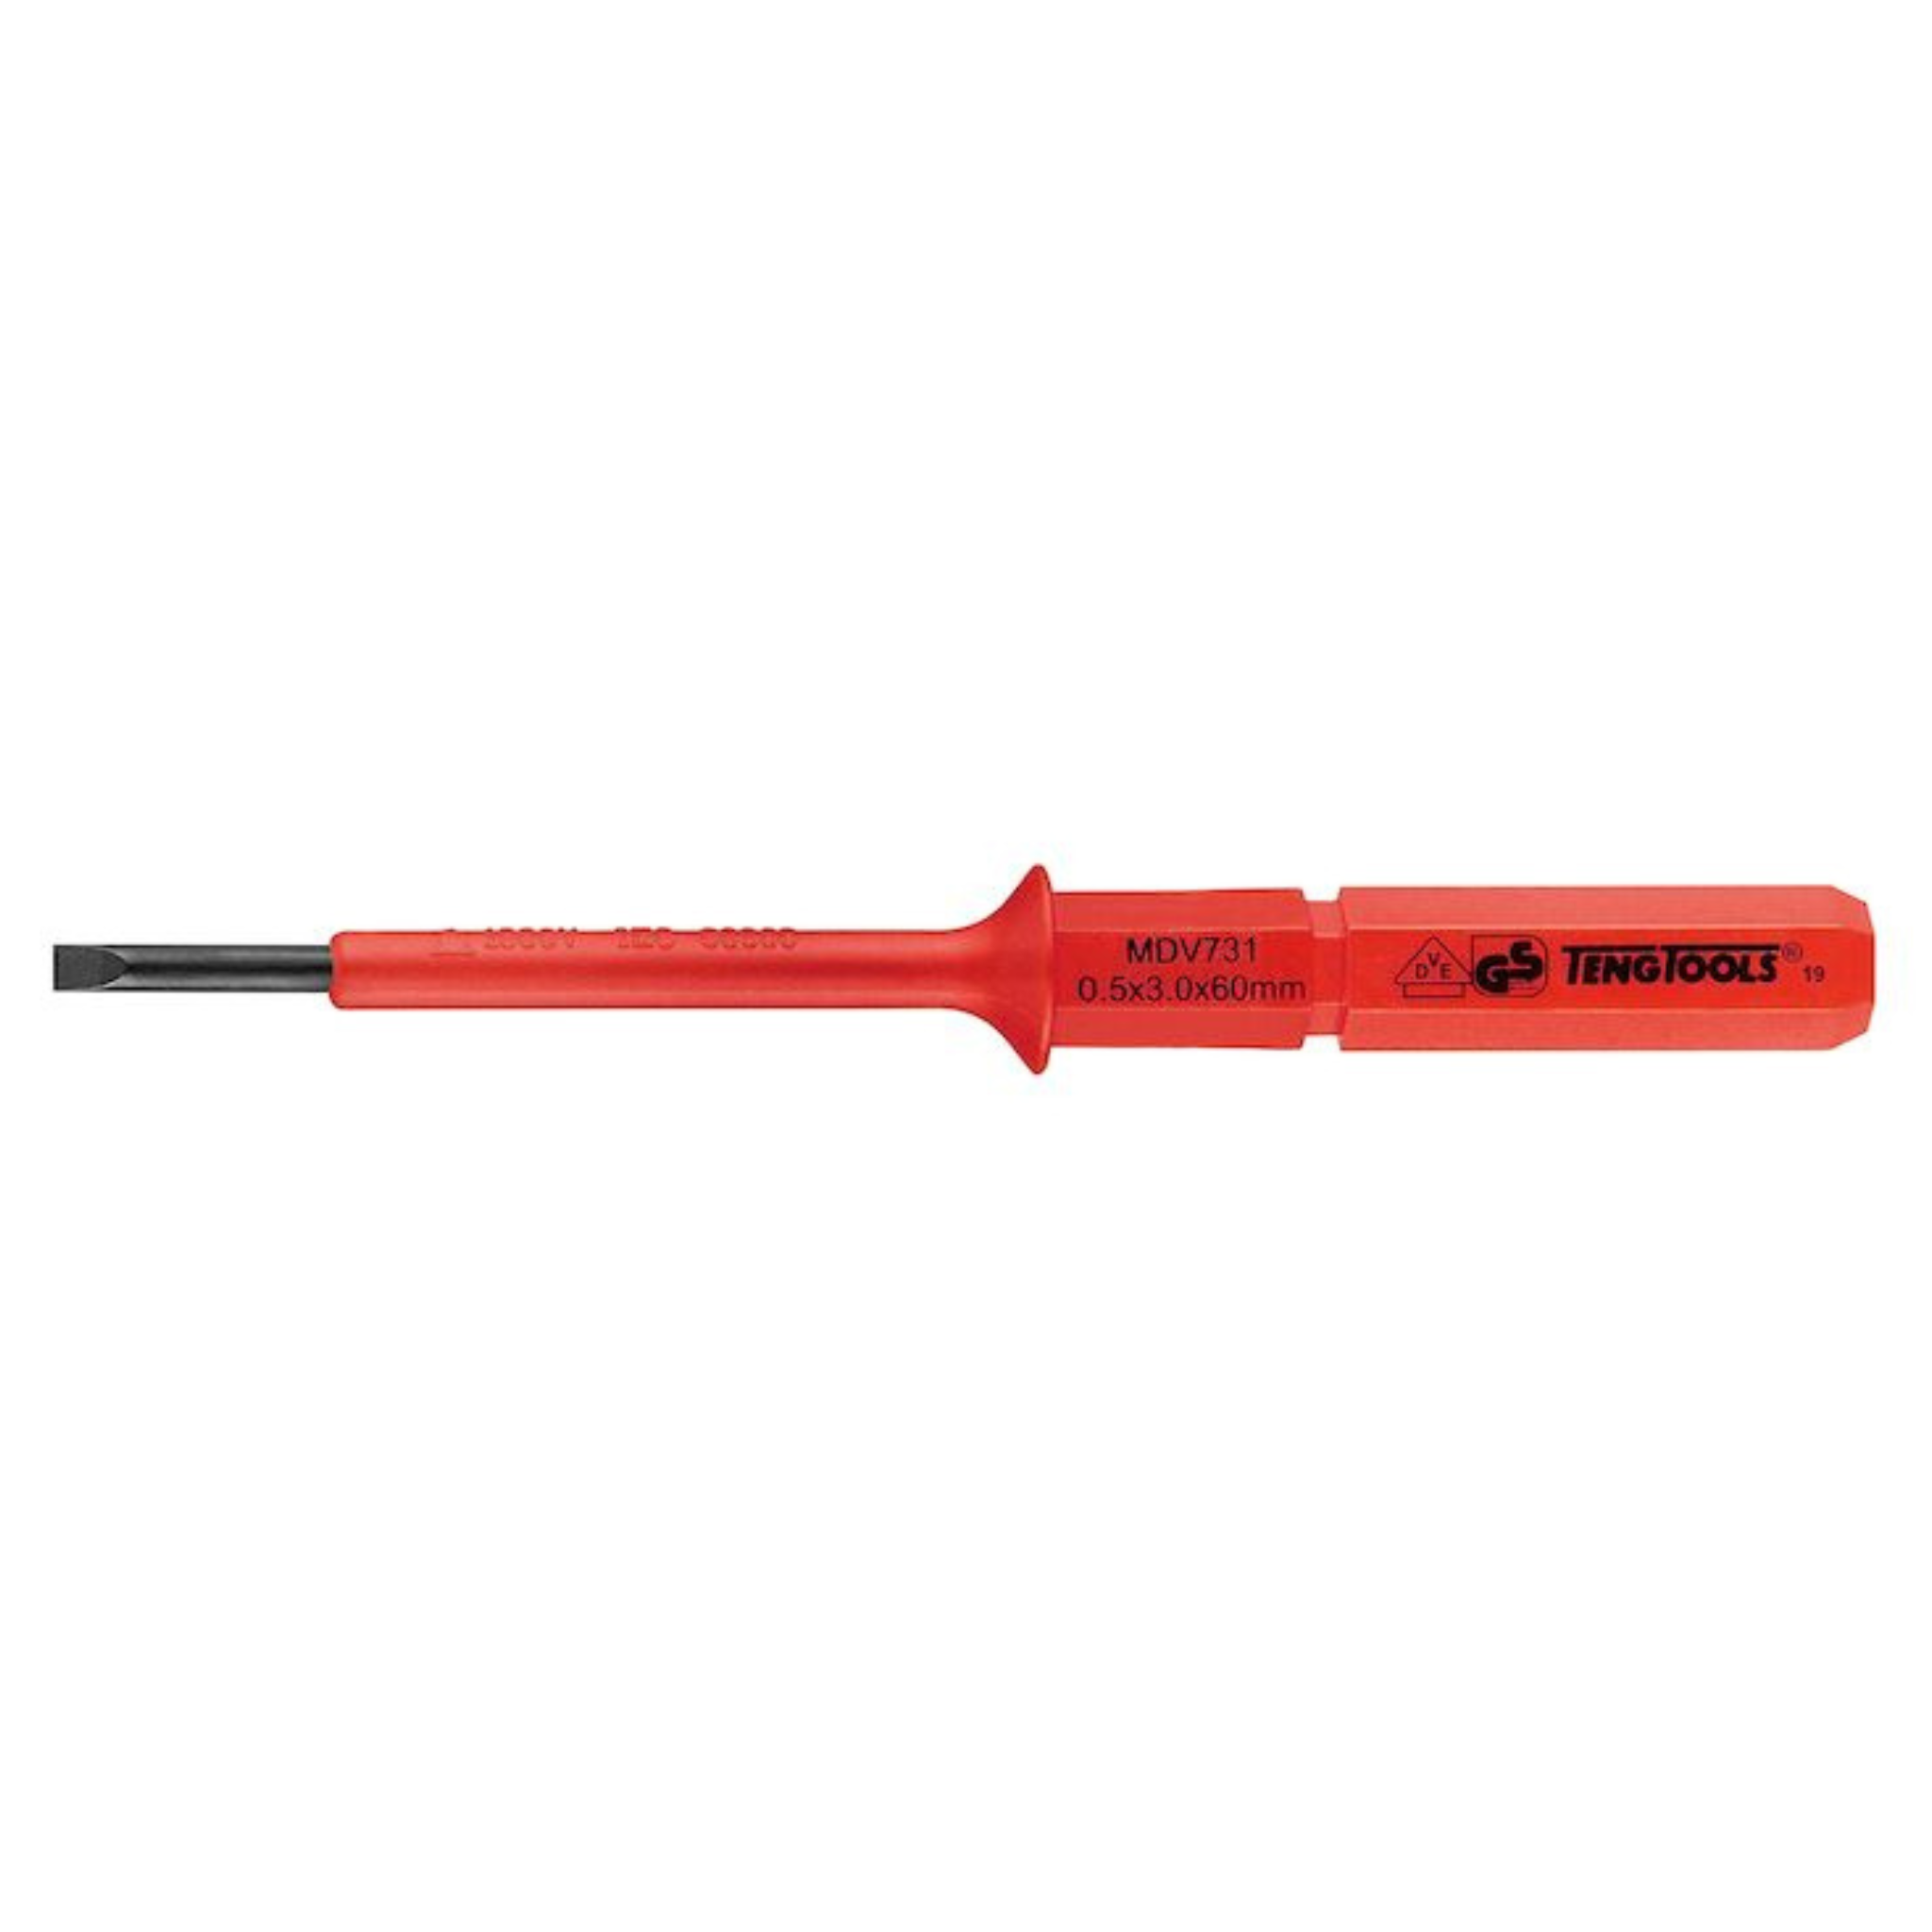 Teng Tools 1000 Volt Insulated Interchangeable Screwdriver Blades - 4mm Slotted